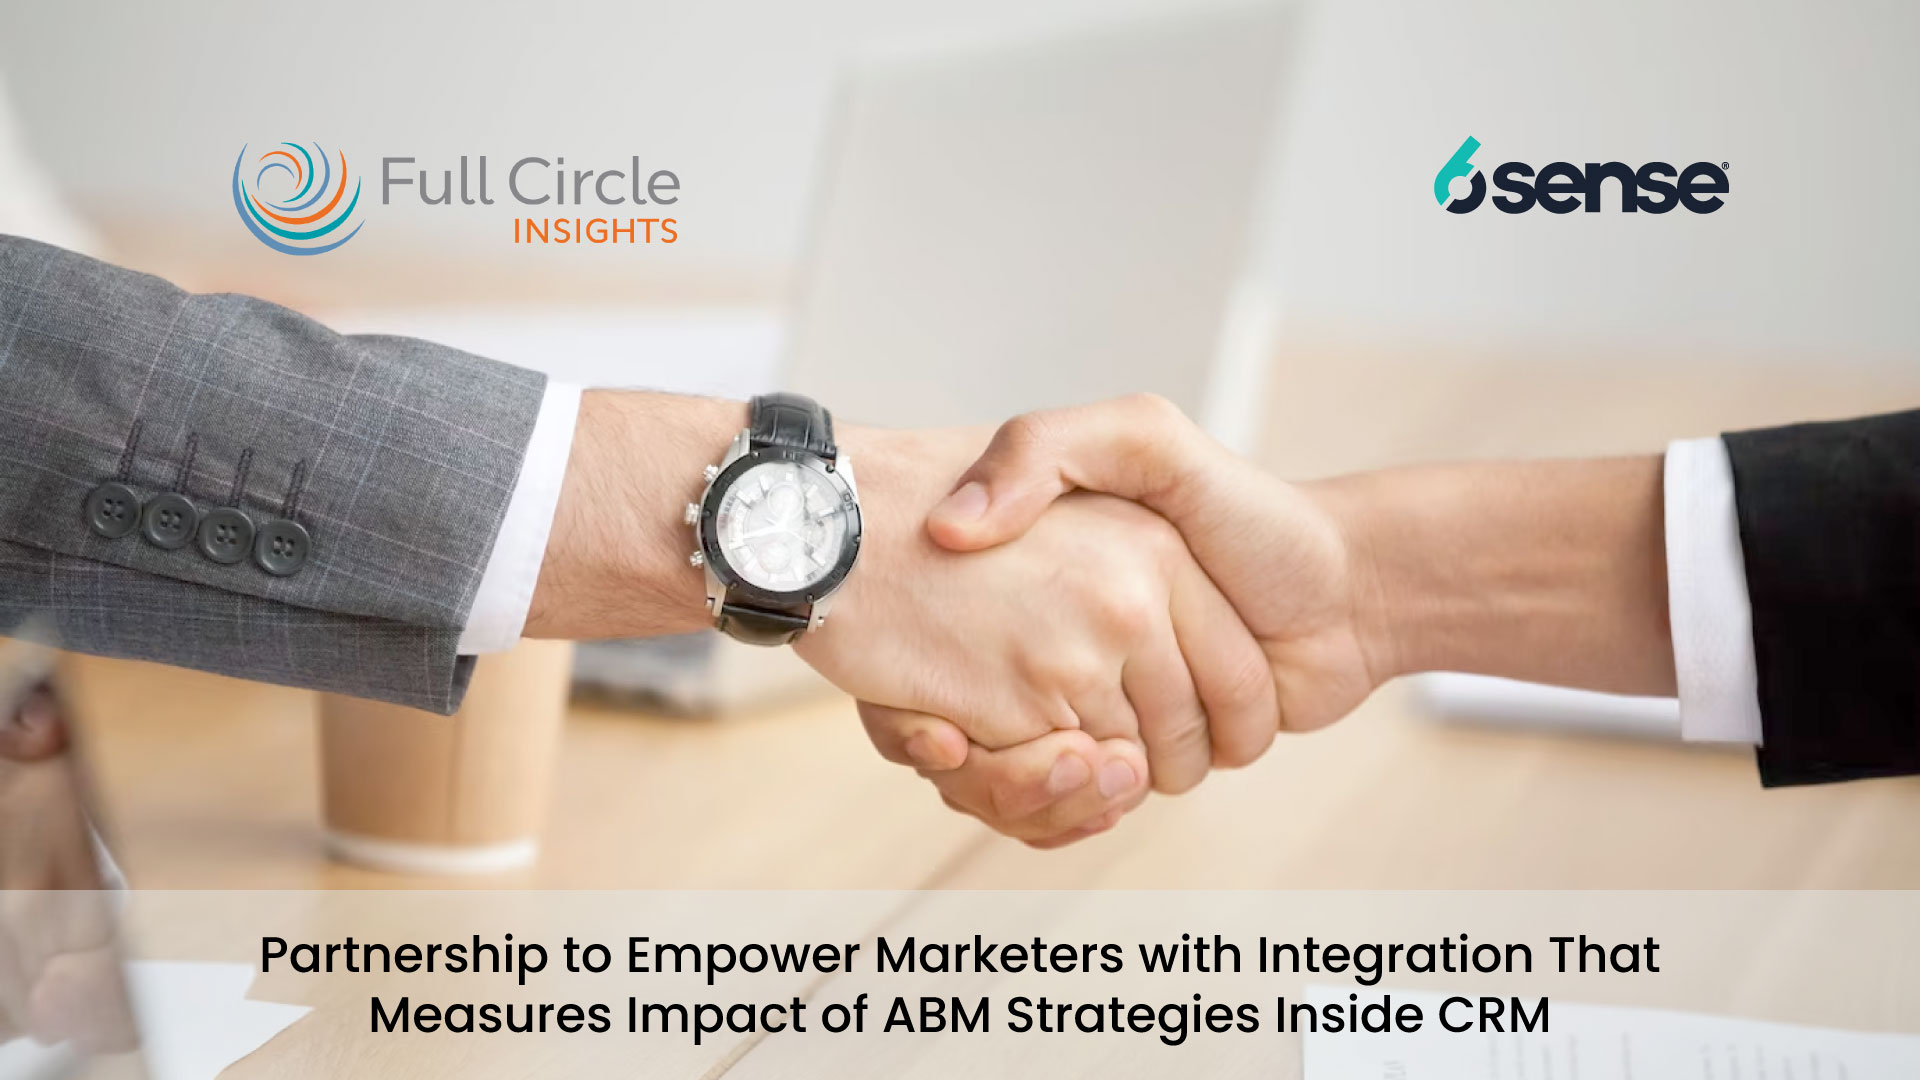 Full Circle Insights Partners with 6sense on Integration that Empowers Marketers to Measure the Impact of ABM Strategies Inside the CRM